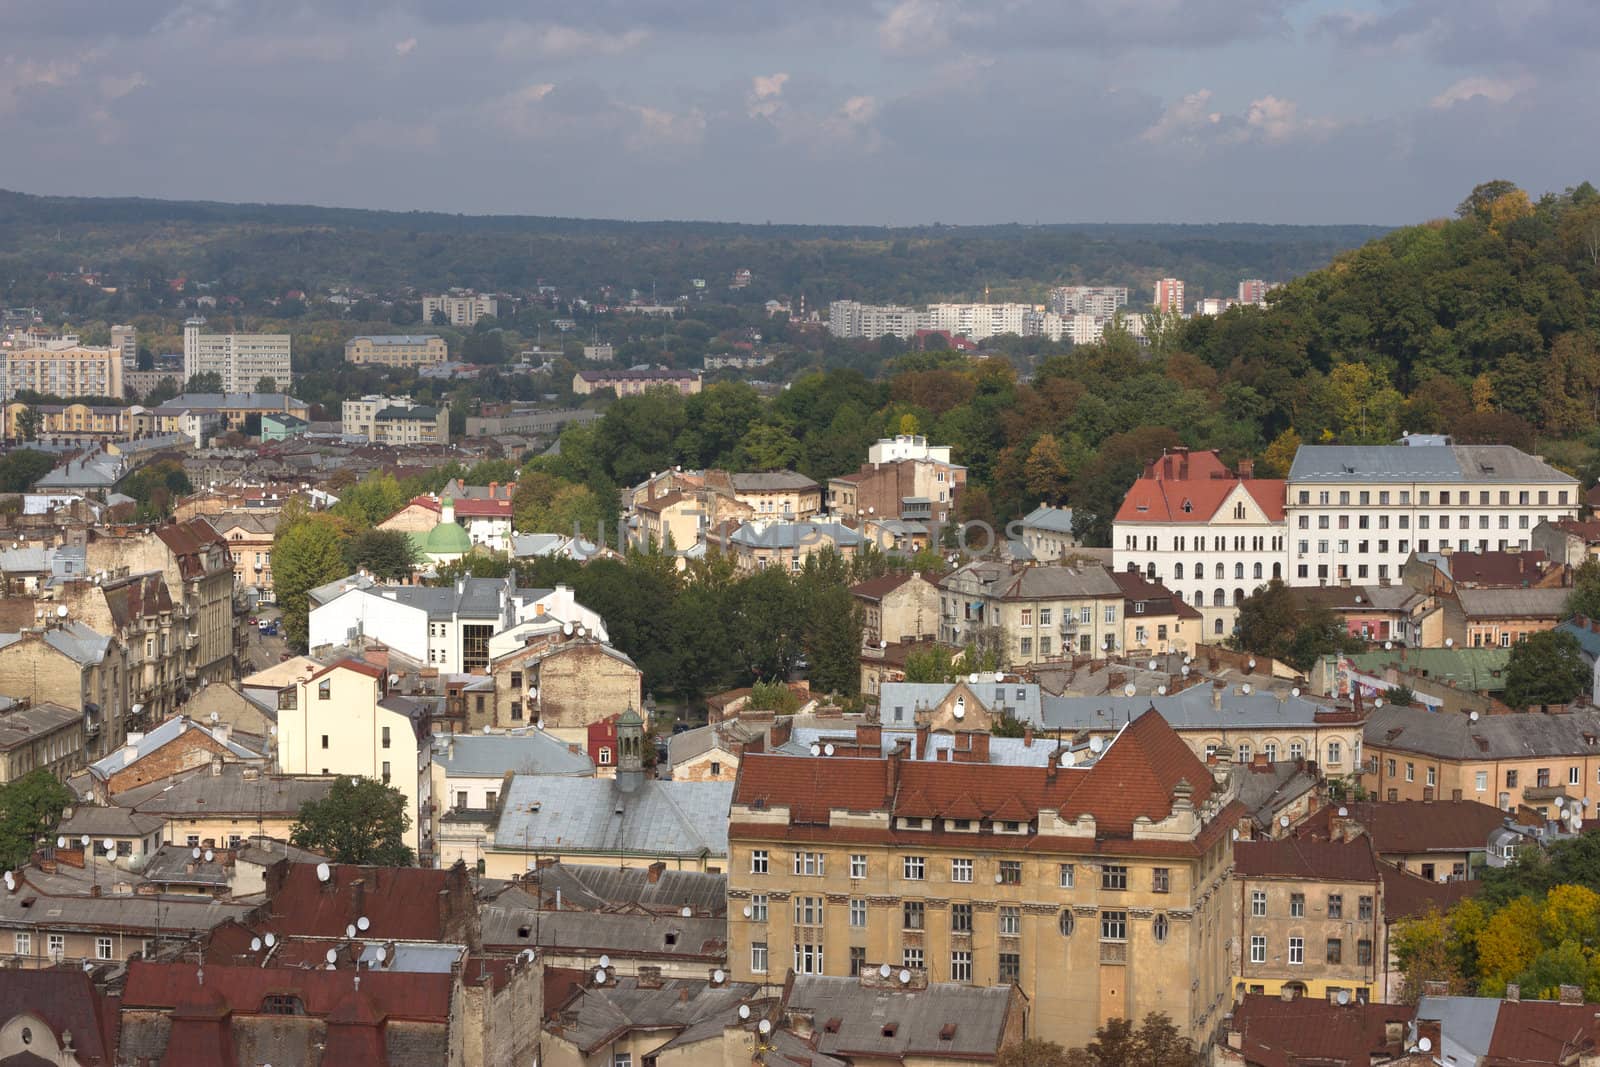 Historical center of Lviv / Lvov in western Ukraine. Panoramic view of the city in Europe